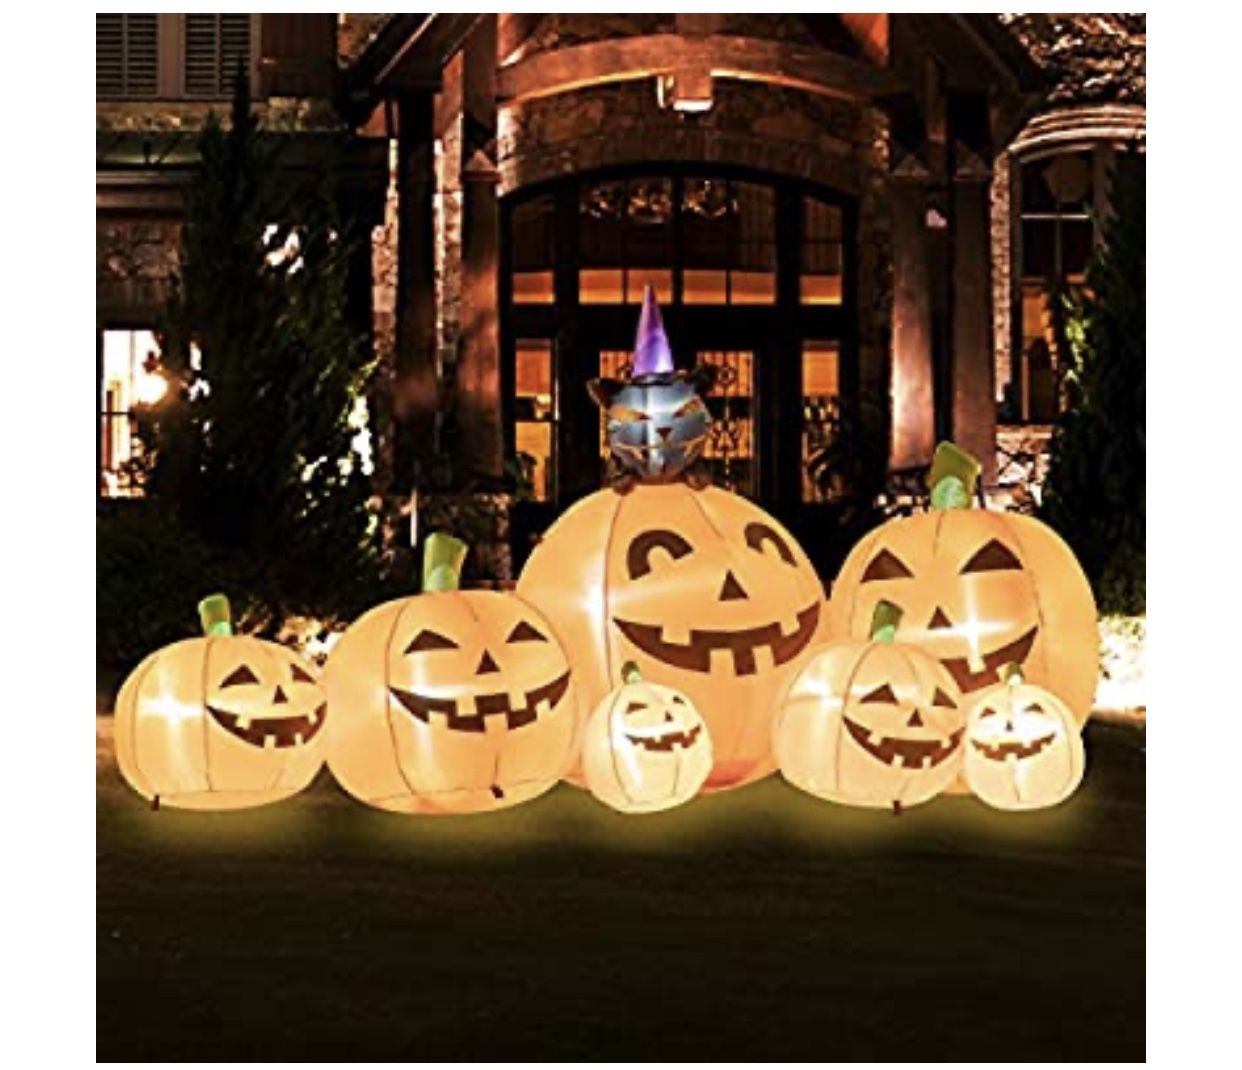 Brand New| Inflatable Pumpkin Huge Halloween 7 FT Long Inflatable 7 Pumpkins with Witch's Cat for Blow Up Yard Decoration - Lawn Inflatables Home Fam